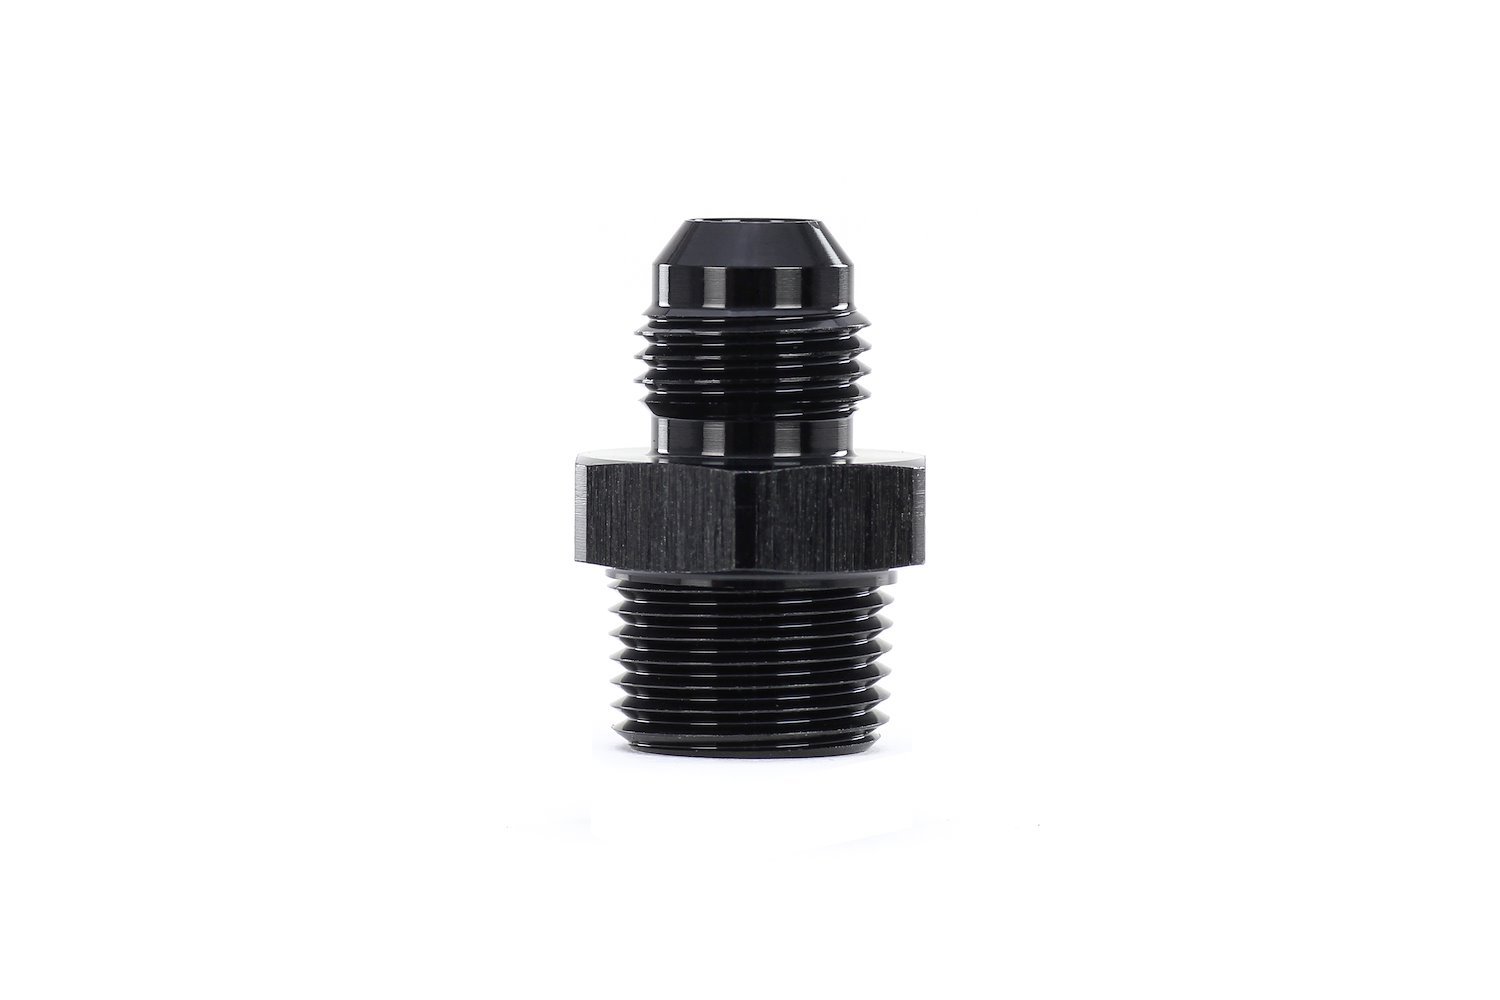 AN8168xM2215 AN Flare to Metric Adapter, Convert Metric Female Threads To Male An Flare